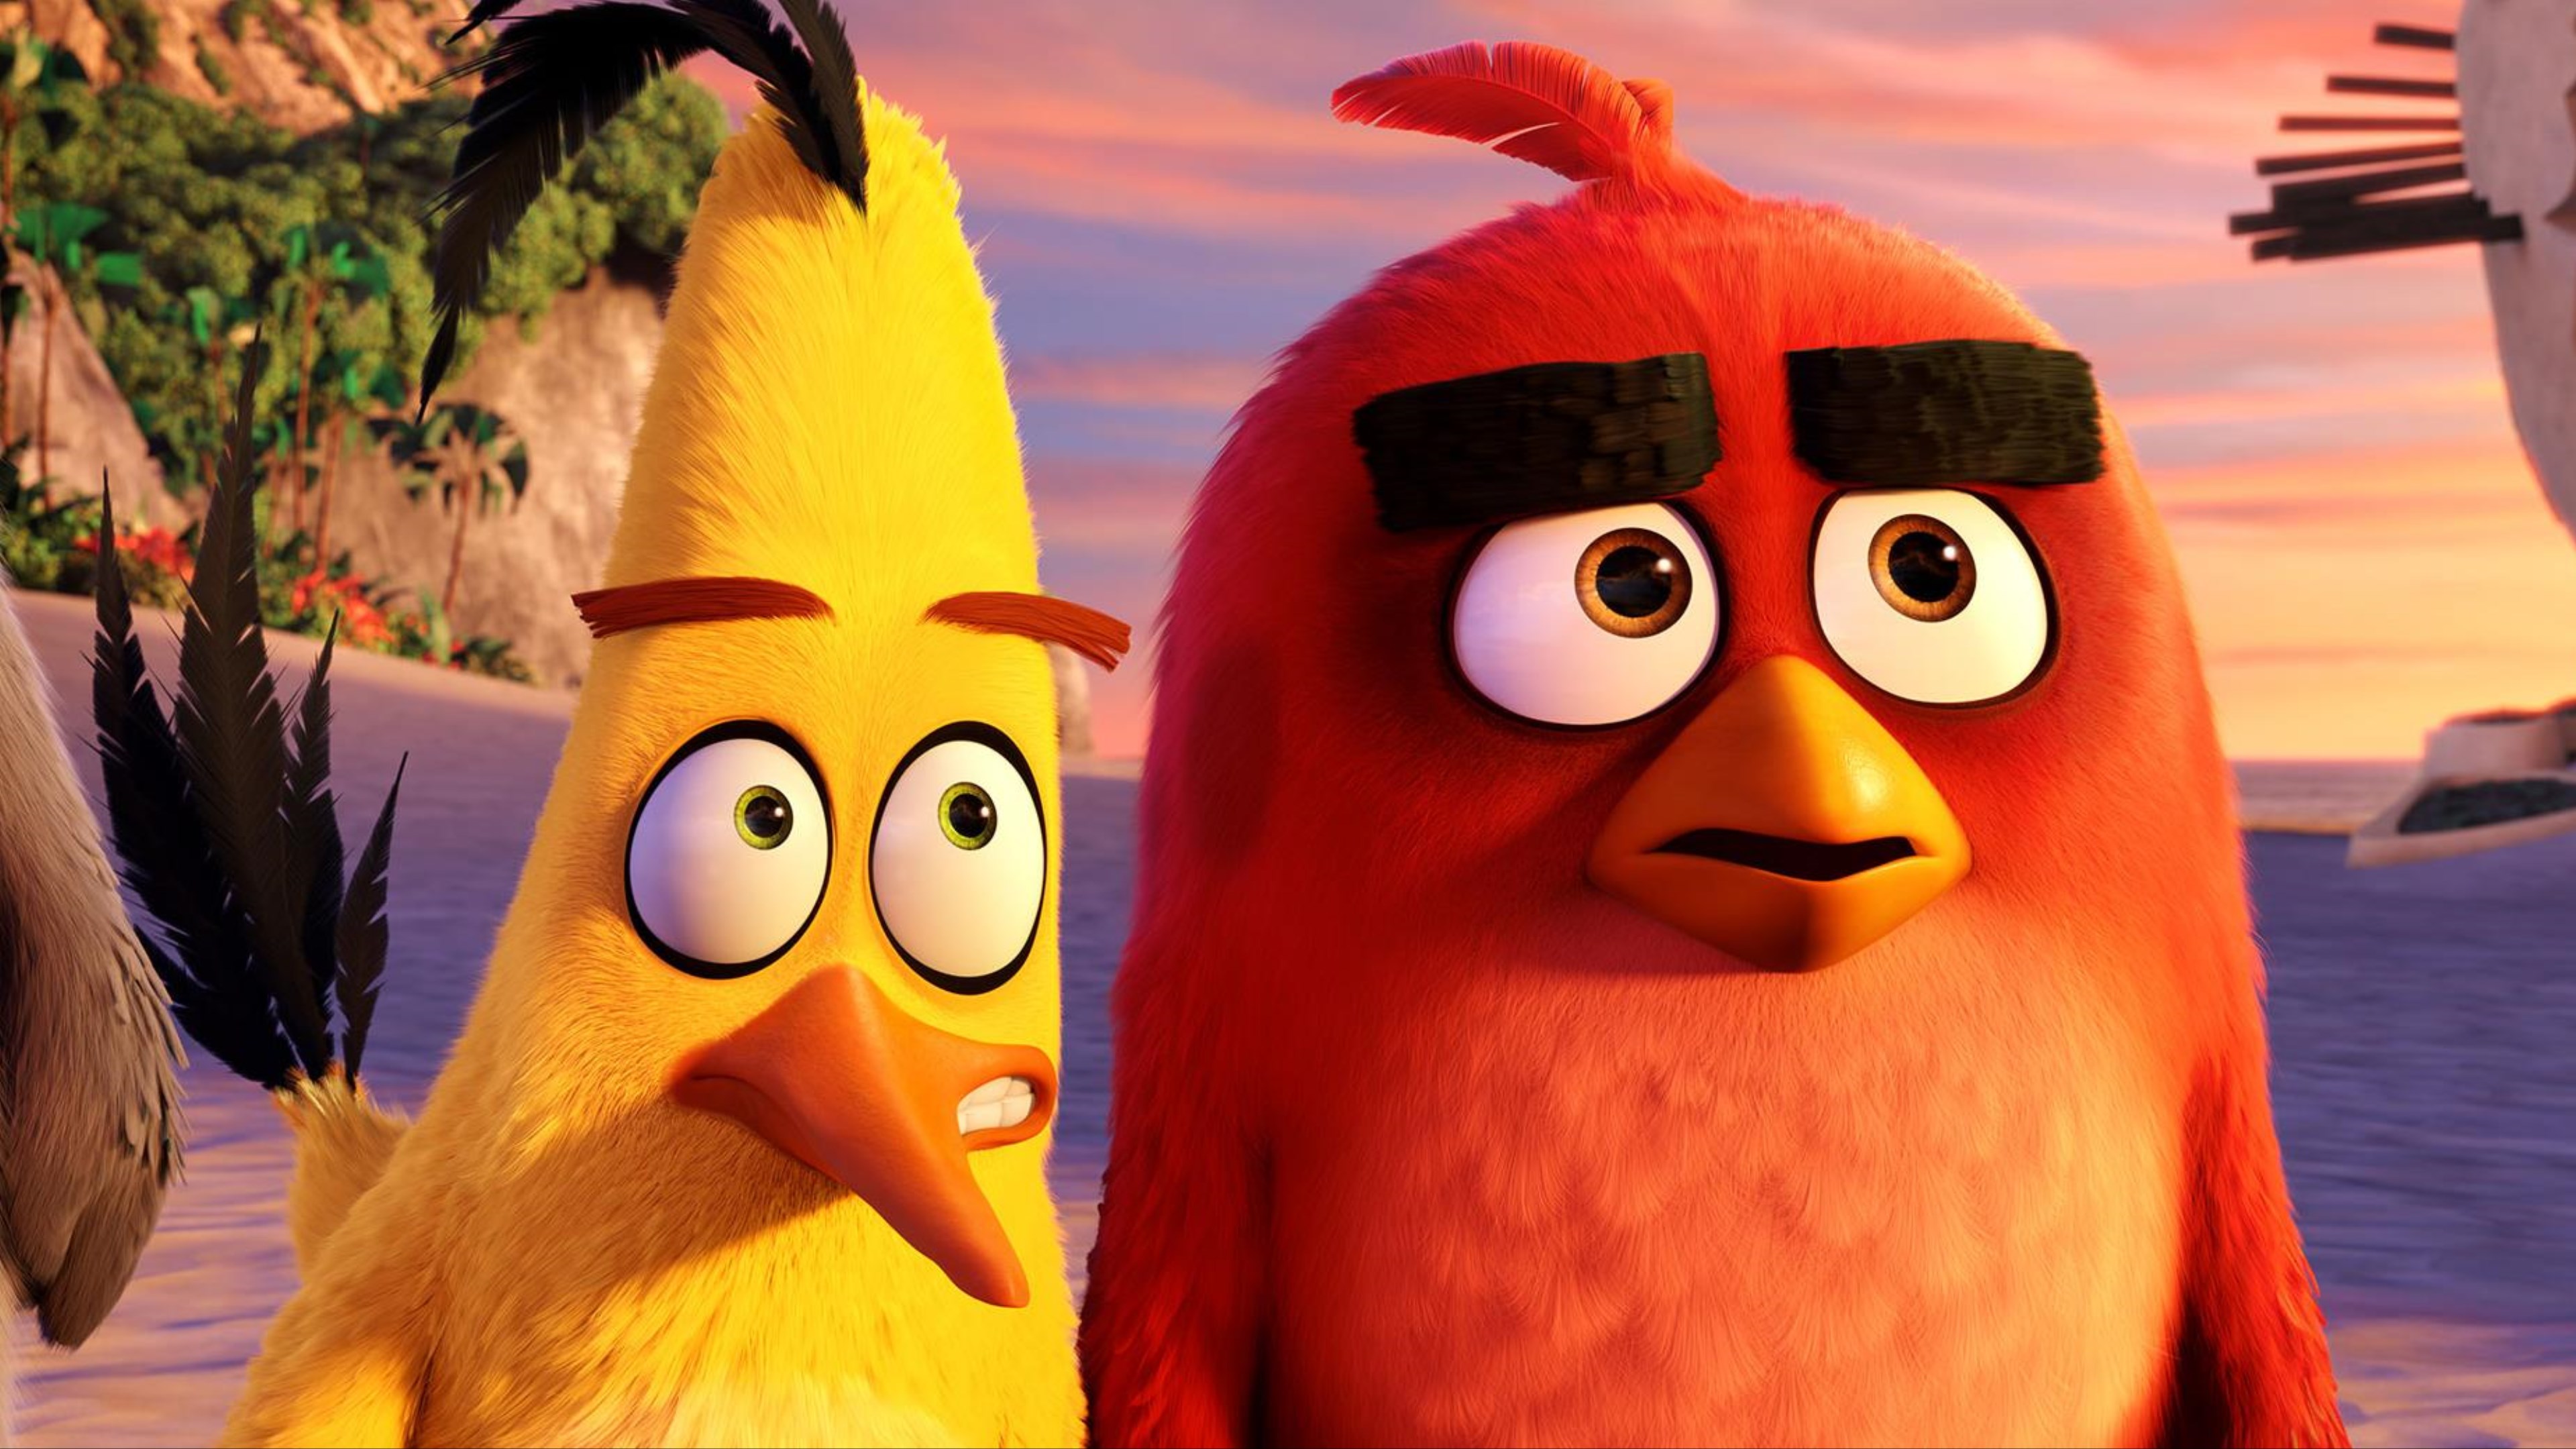 329885 Angry Birds Movie 2, Characters, 4k - Rare Gallery HD Wallpapers